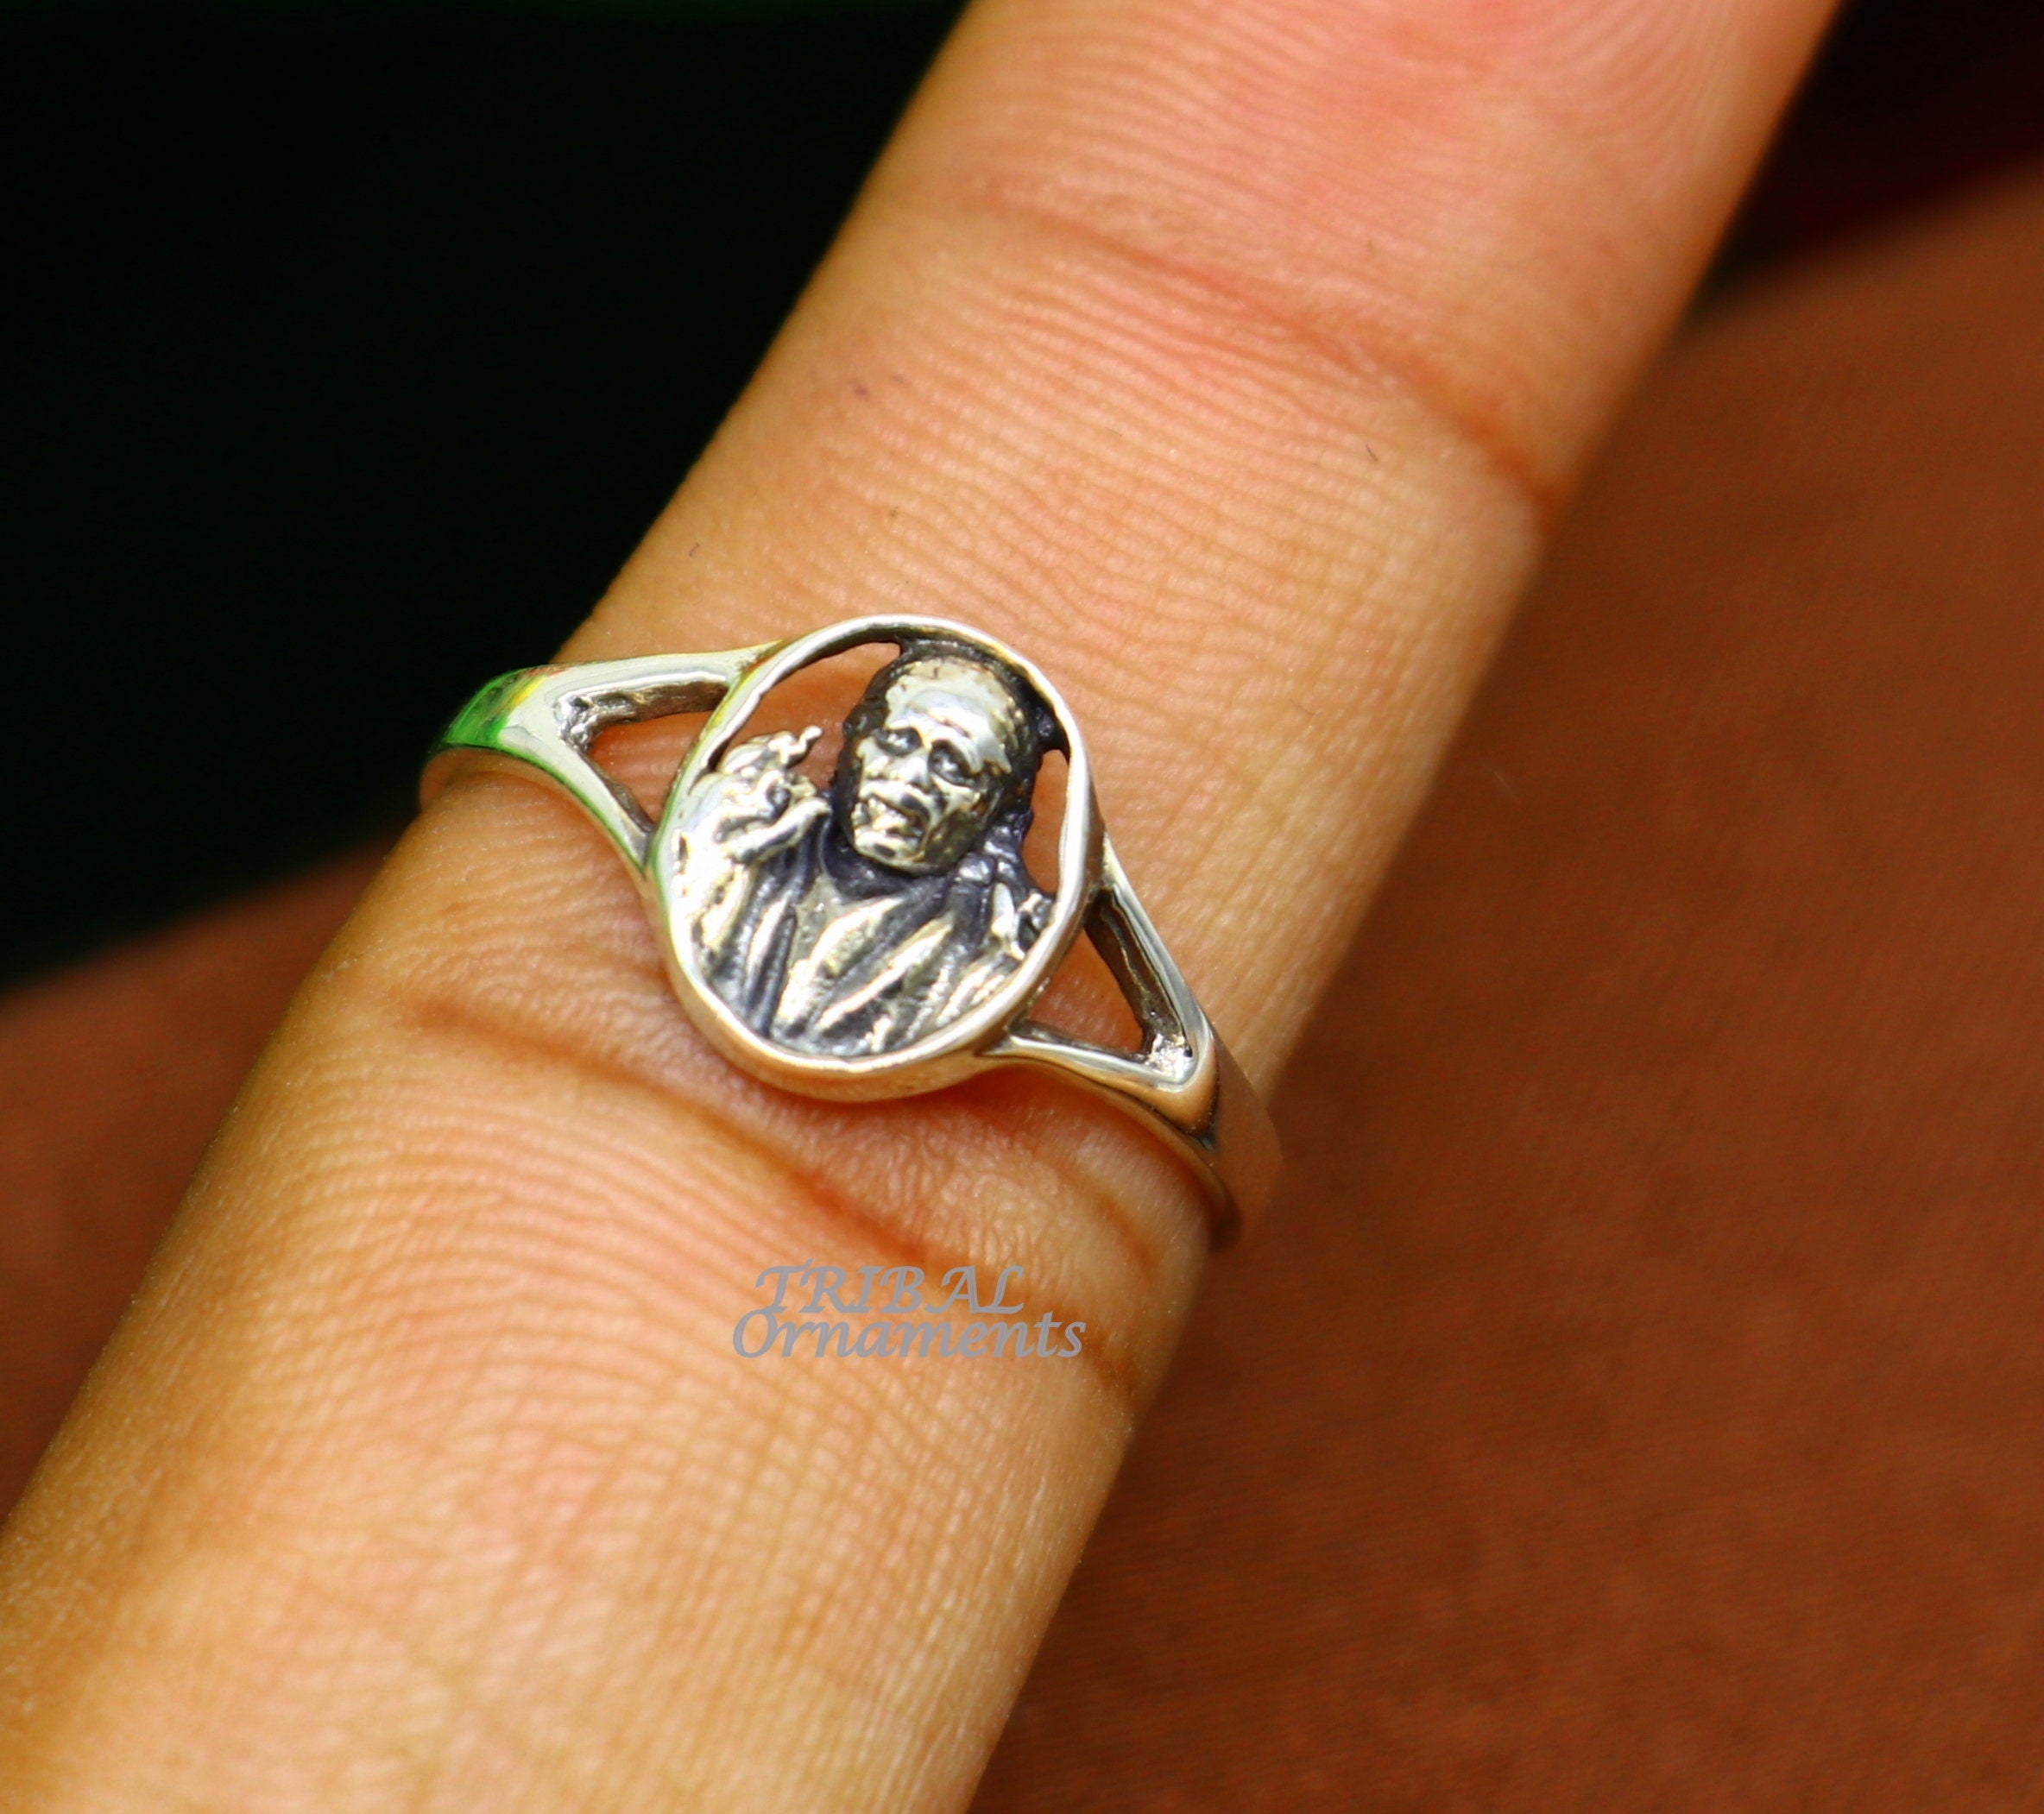 Buy Silver Ring for Women at the Best Price – Jewllery Design